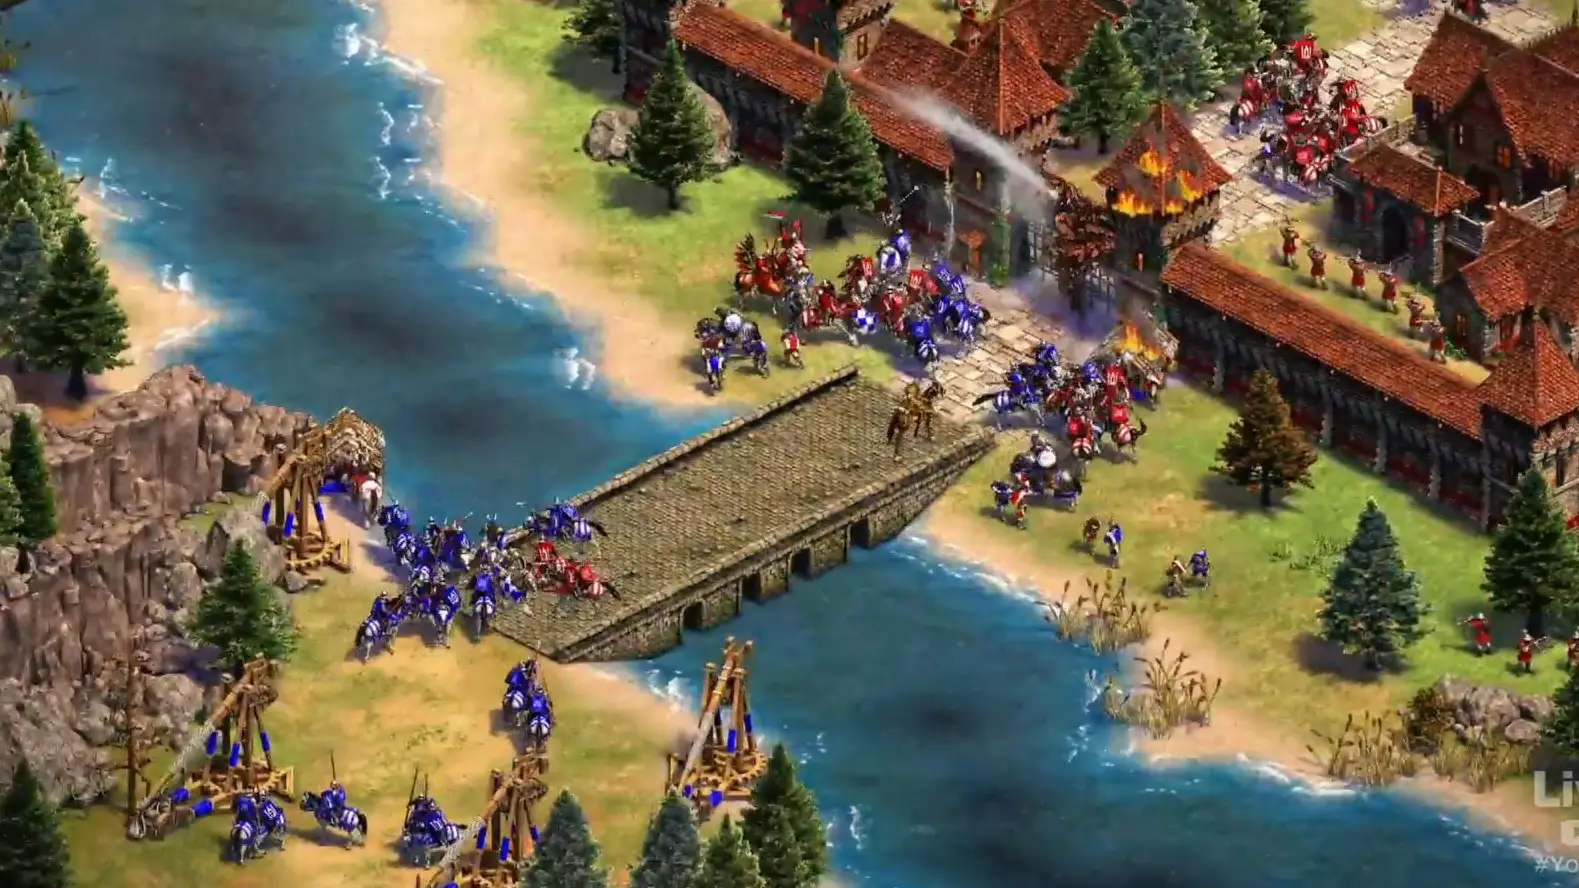 After 20 years, it's good seeing Age of Empires 2 back in action